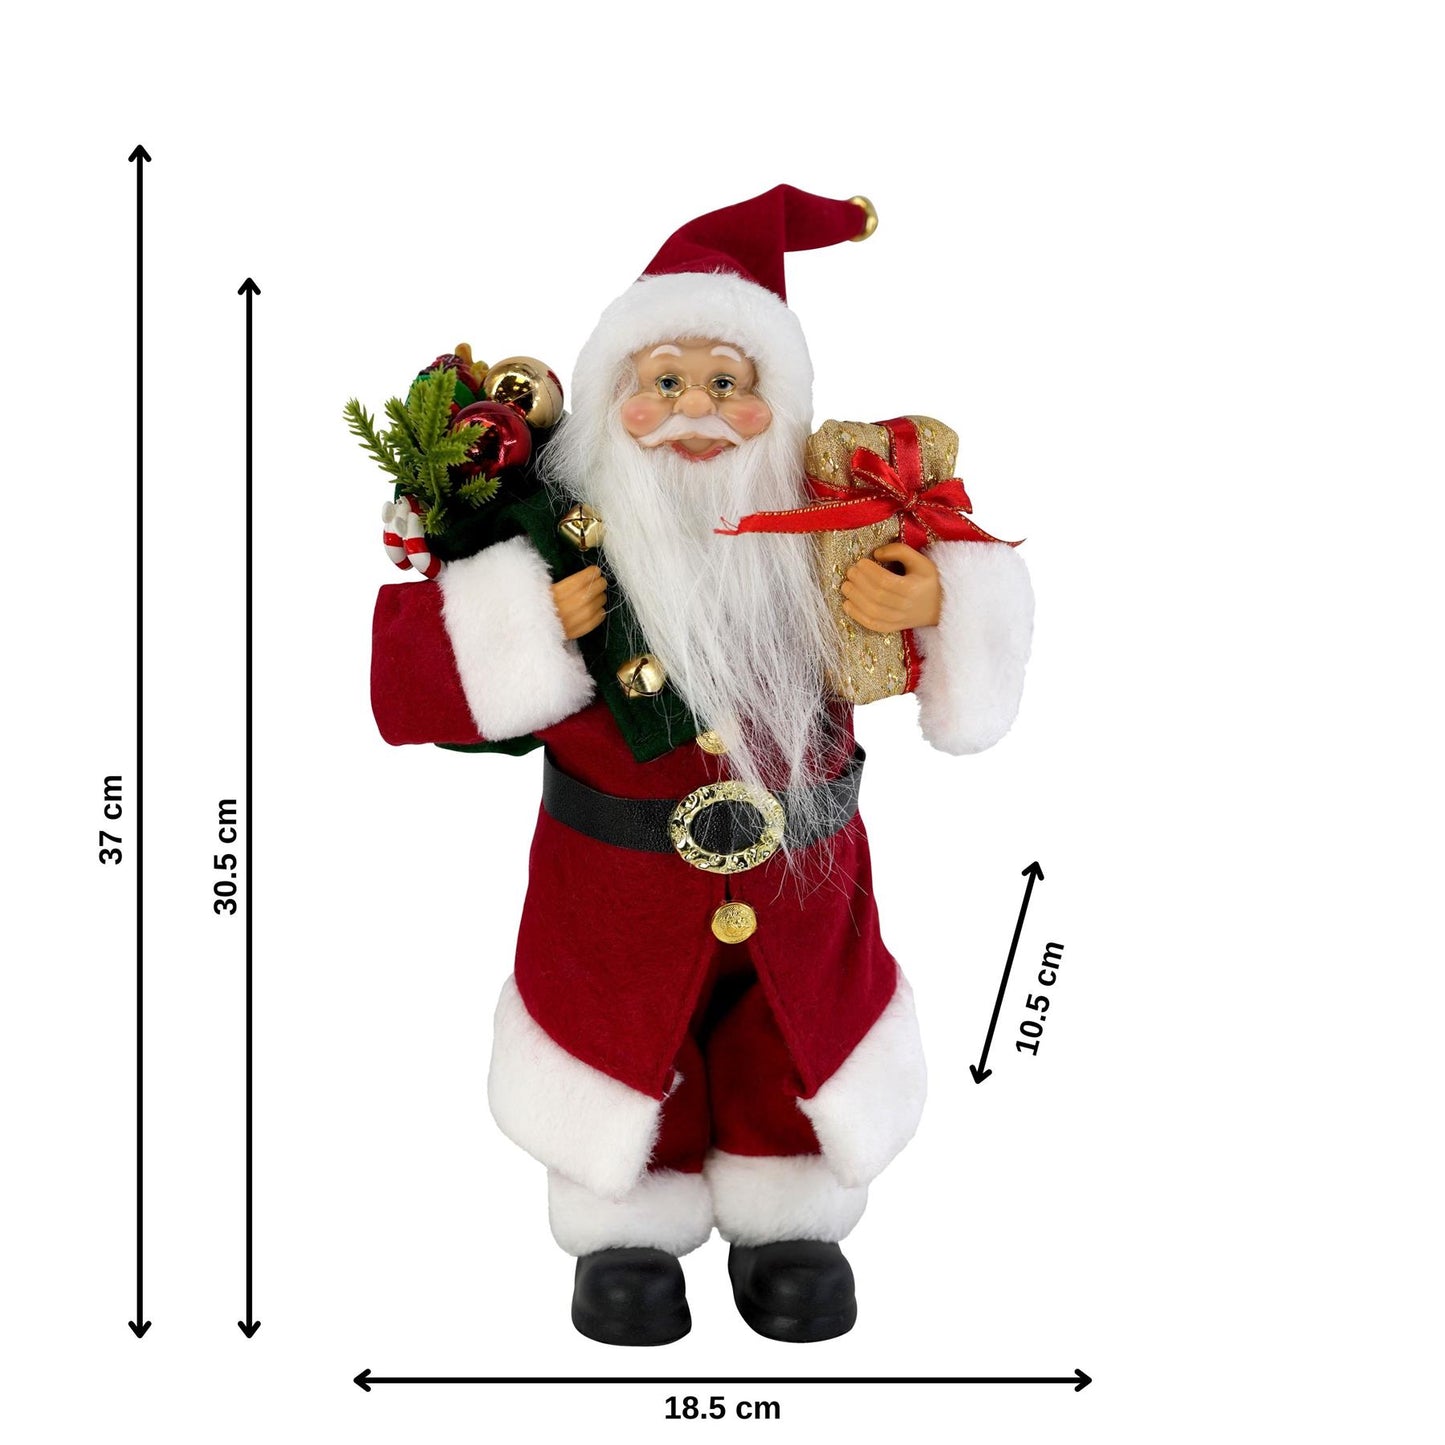 Standing Santa Claus Figure by The Magic Toy Shop - UKBuyZone